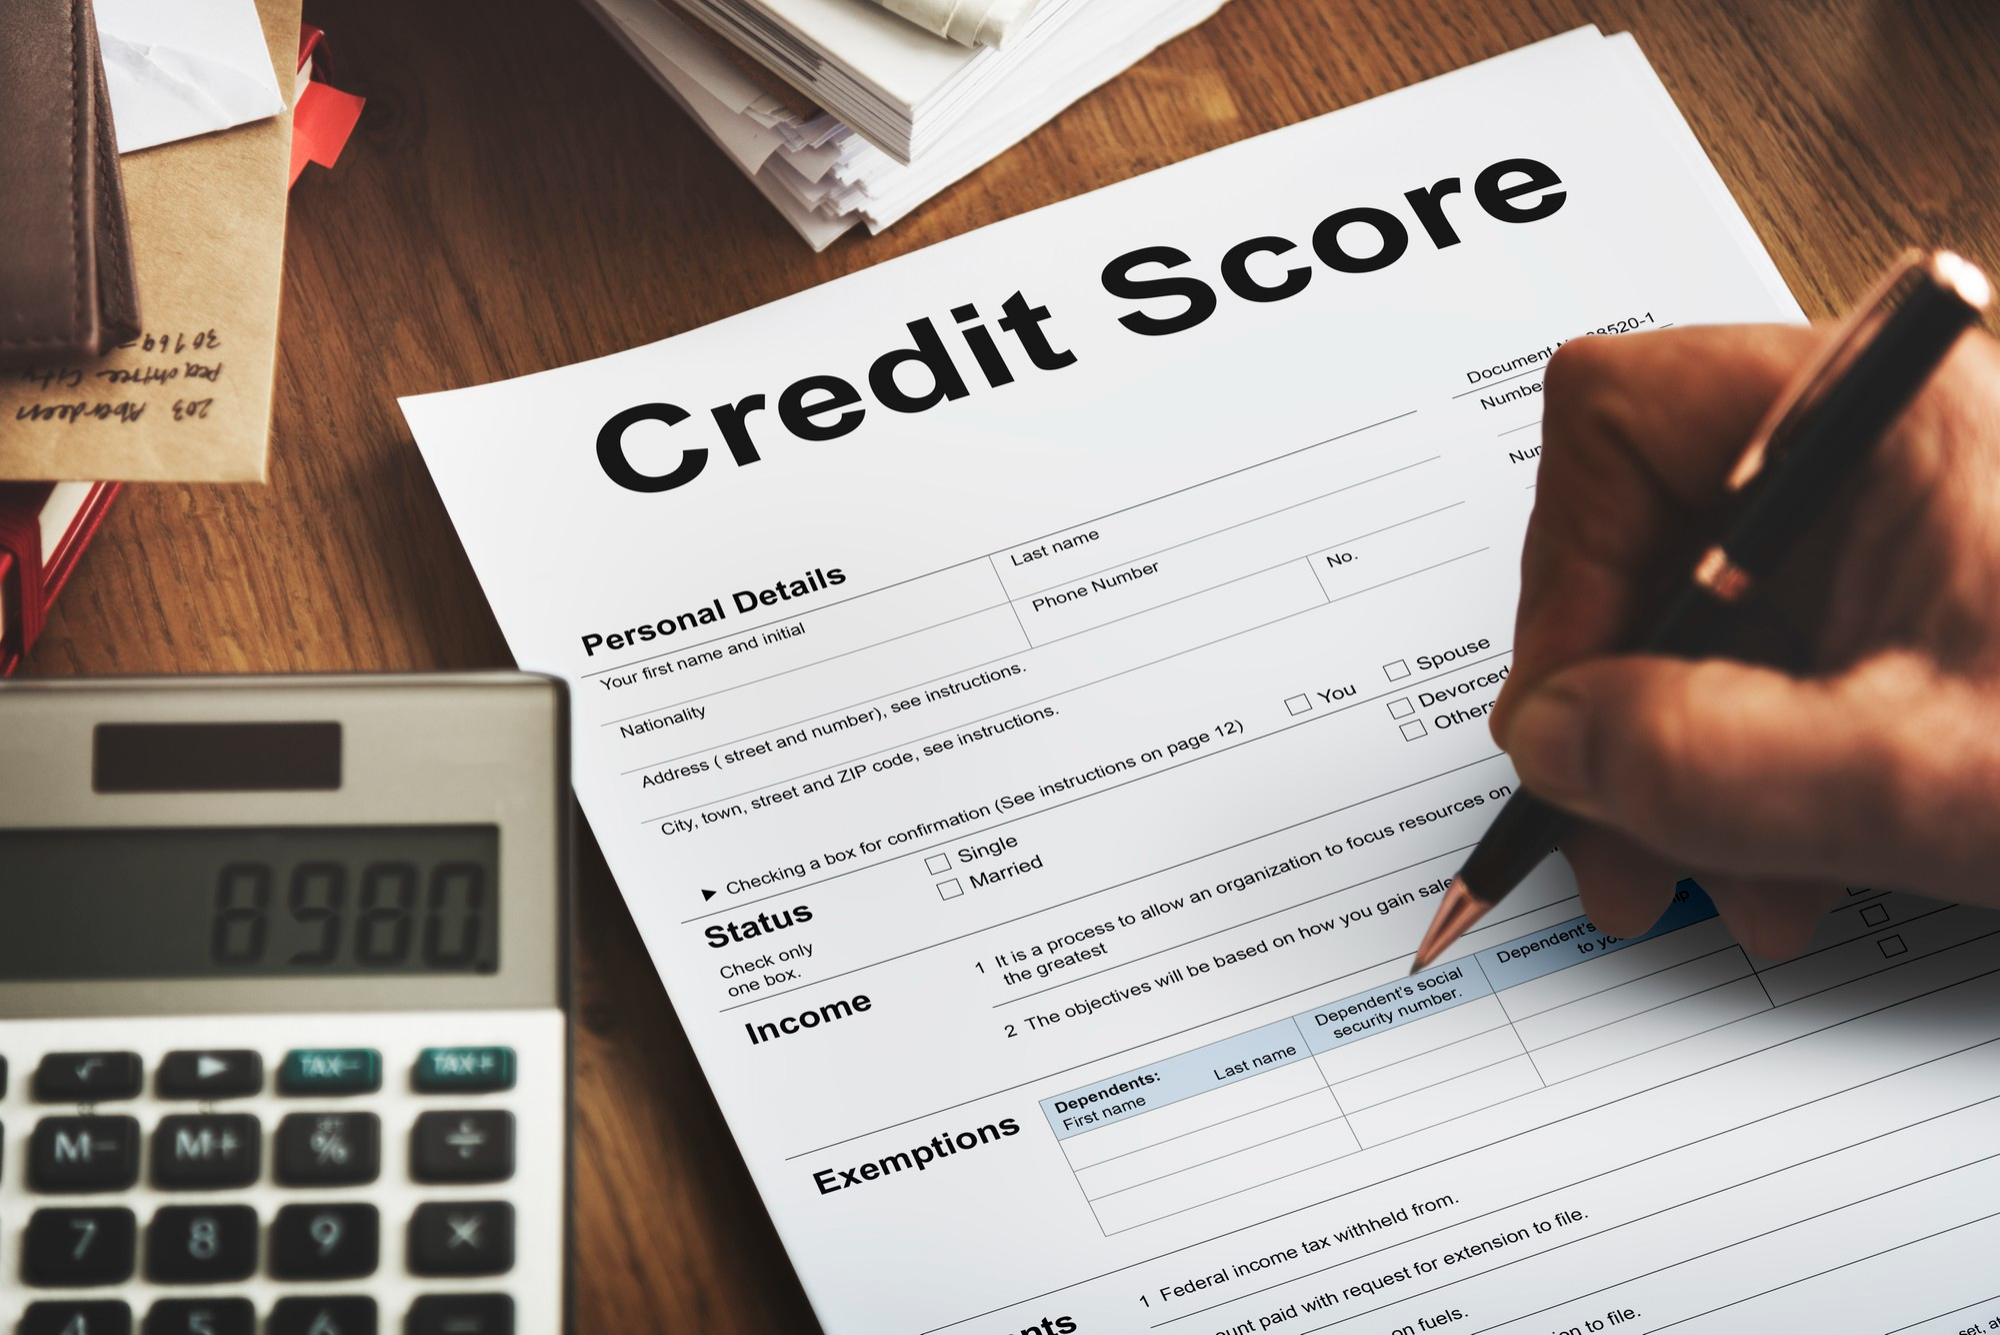 Check if your credit score is good enough for an American Express card. Source: Freepik.